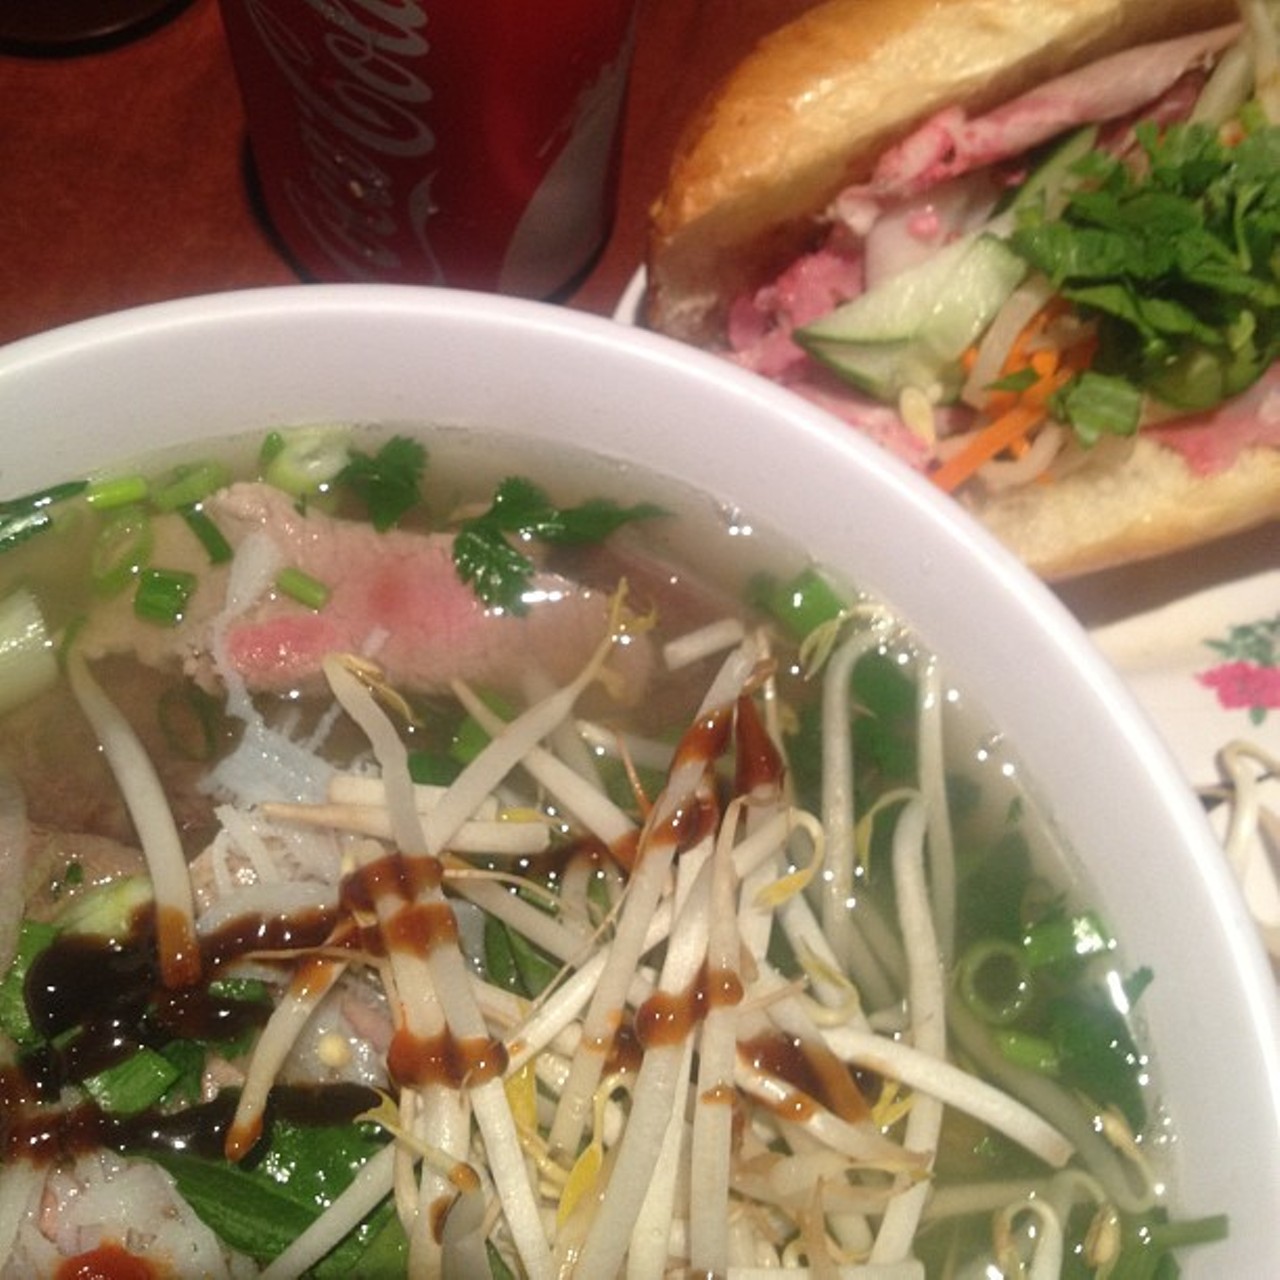 Best Pho in #cle #clefood #pho #phoshizzle